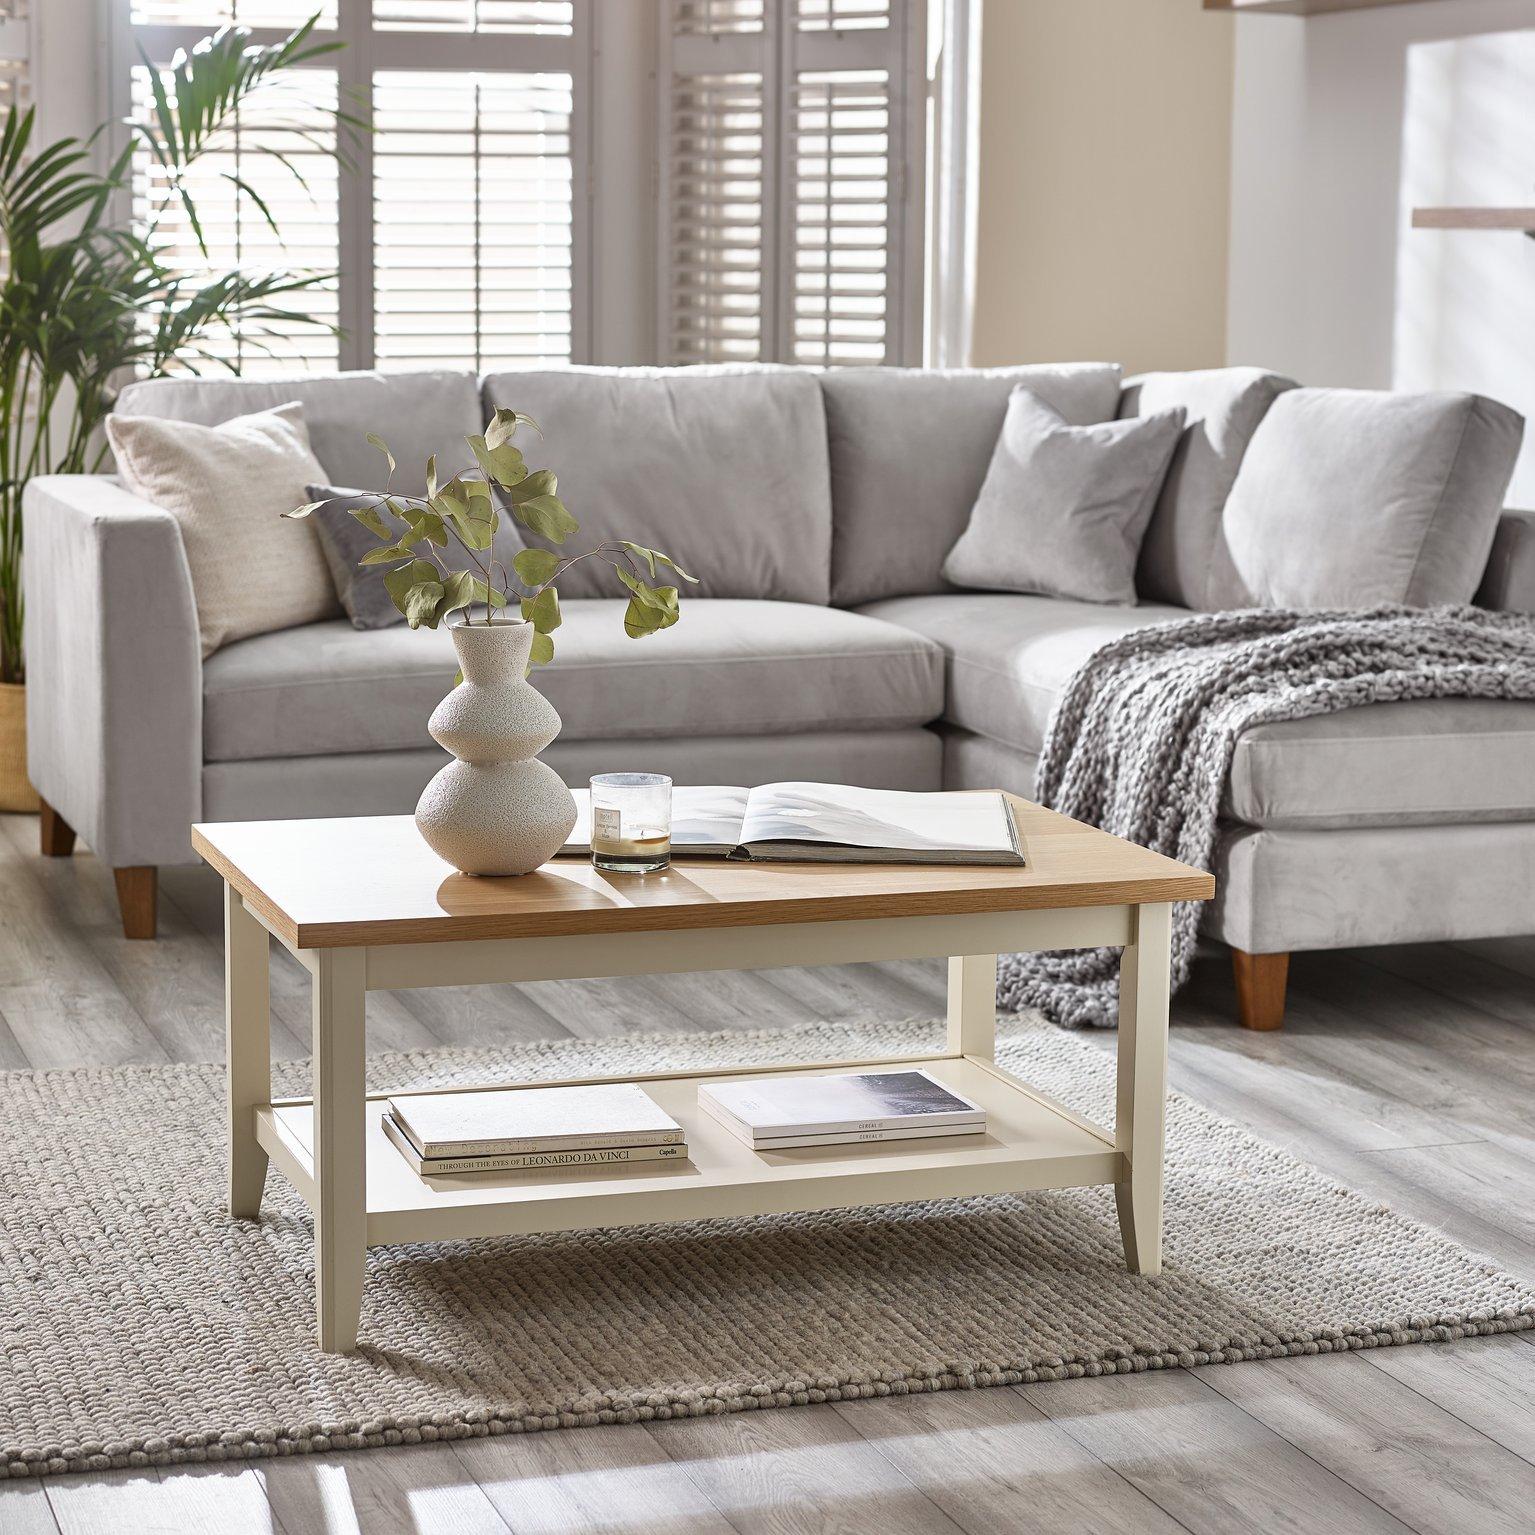 Solid Wood Coffee Table - Eden Wooden Coffee Table - Pale Oak Stain Tabletop Cream Legs - Bright Mod